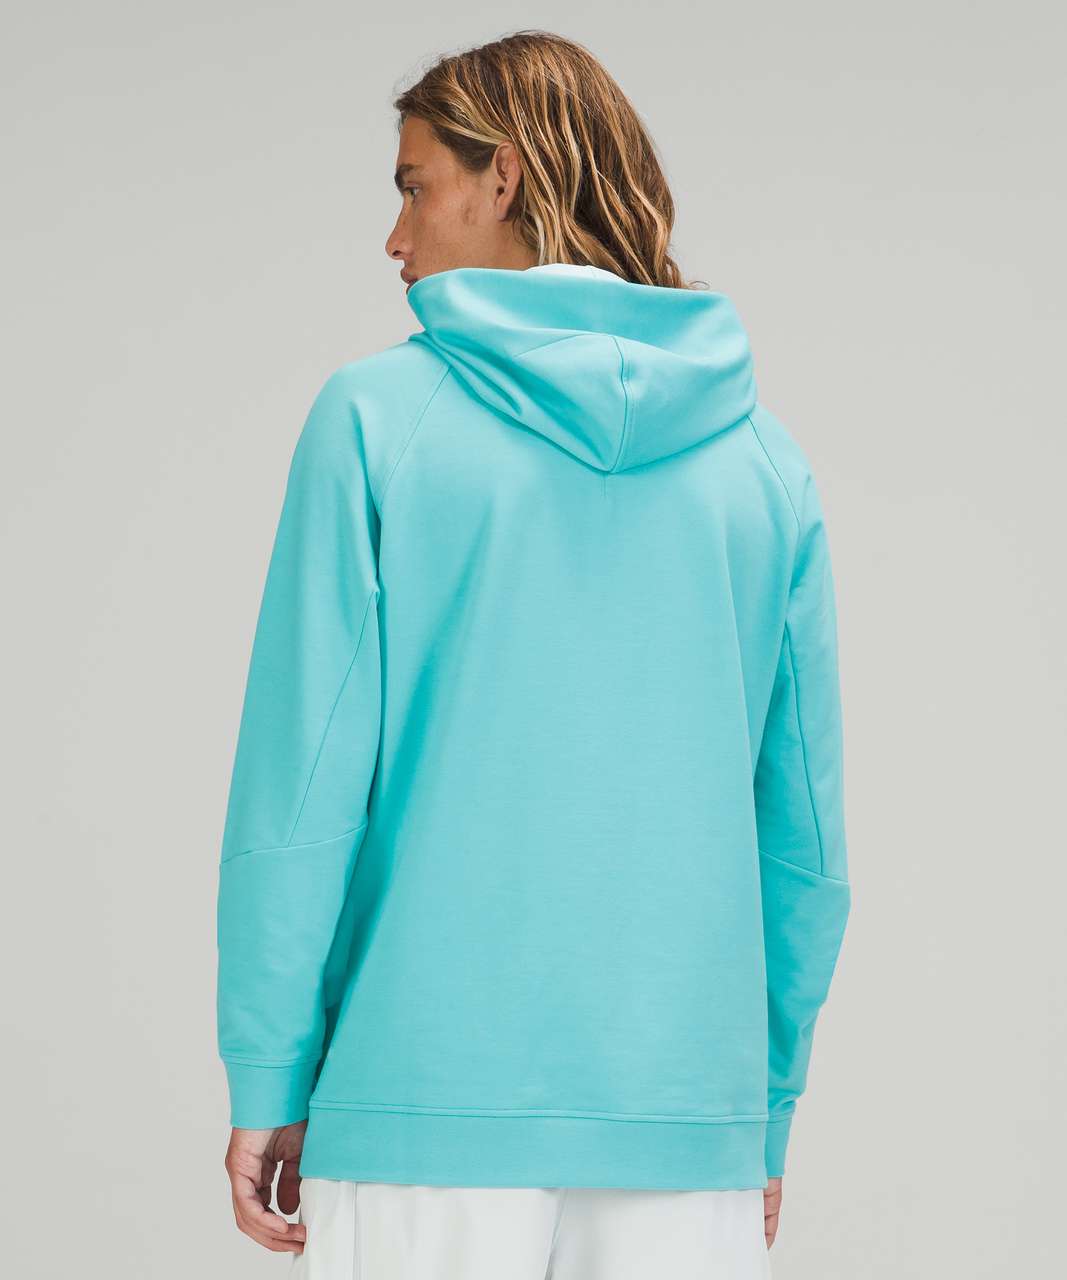 Lululemon City Sweat Pullover Hoodie French Terry - Electric Turquoise